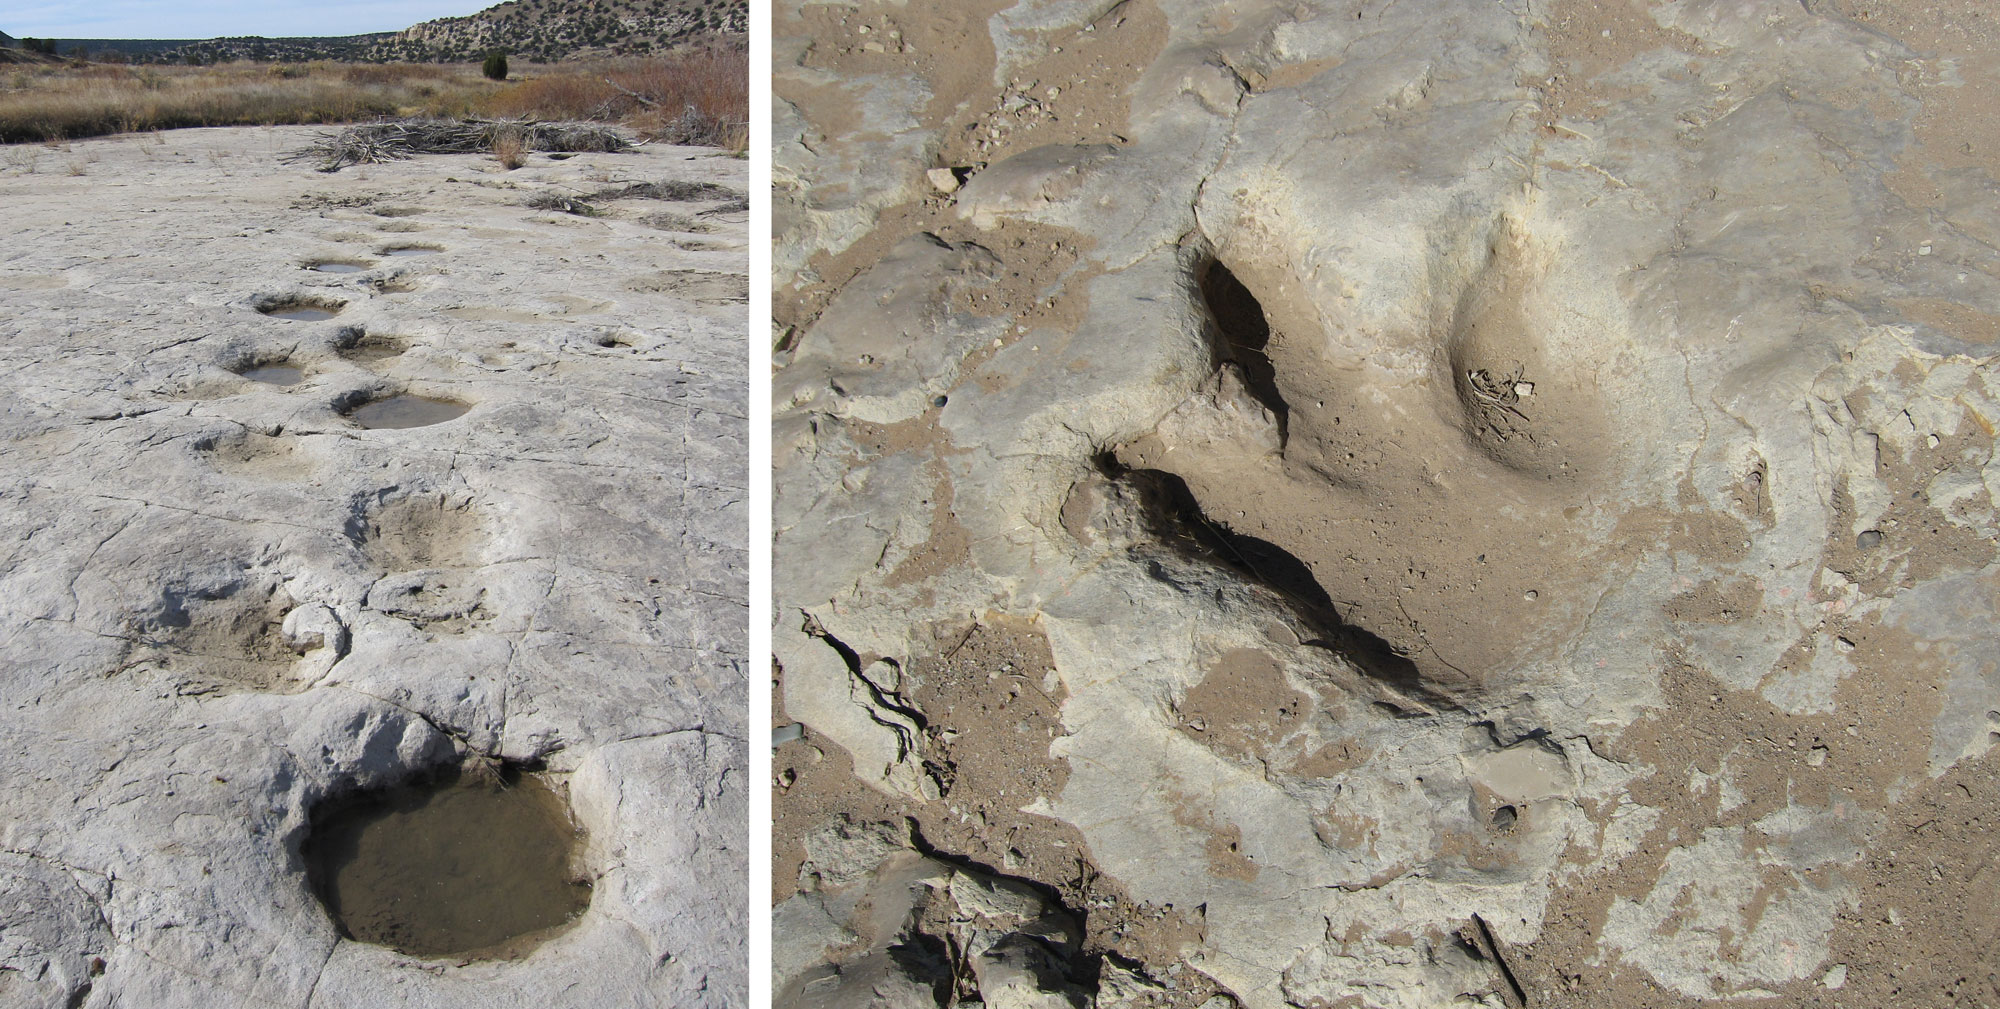 2-panel figure showing photos of Jurassic dinosaur footprints from Colorado. Panel 1: Sauropod trackway with round footprints. Panel 2: Theropod track with three pointed toes.